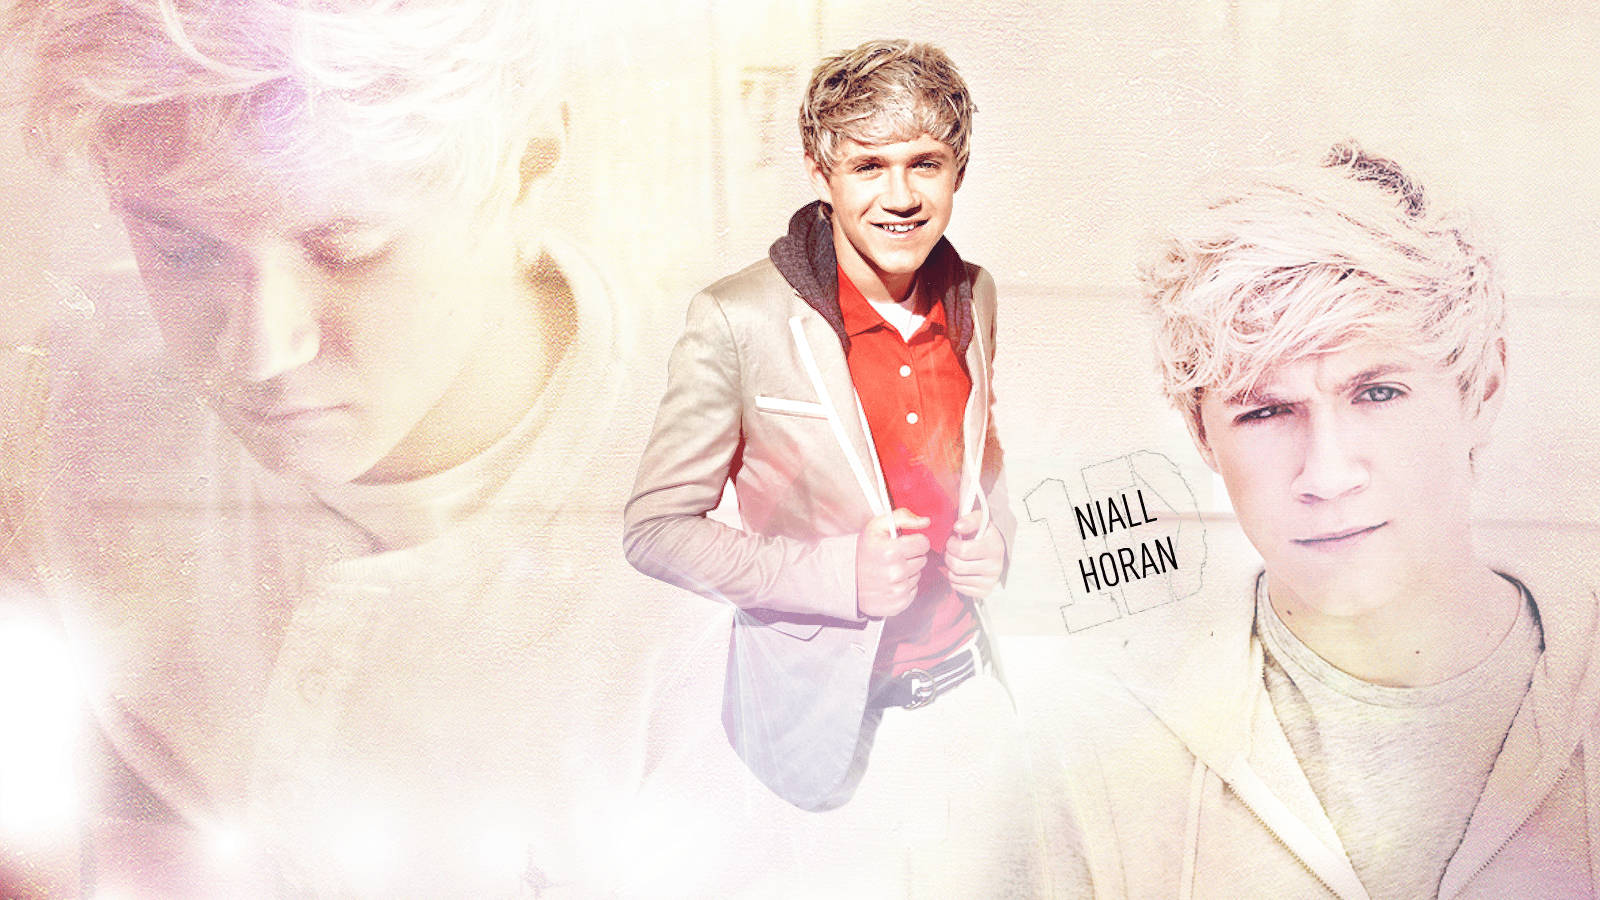 Niall Horan Red Shirt Jacket Background